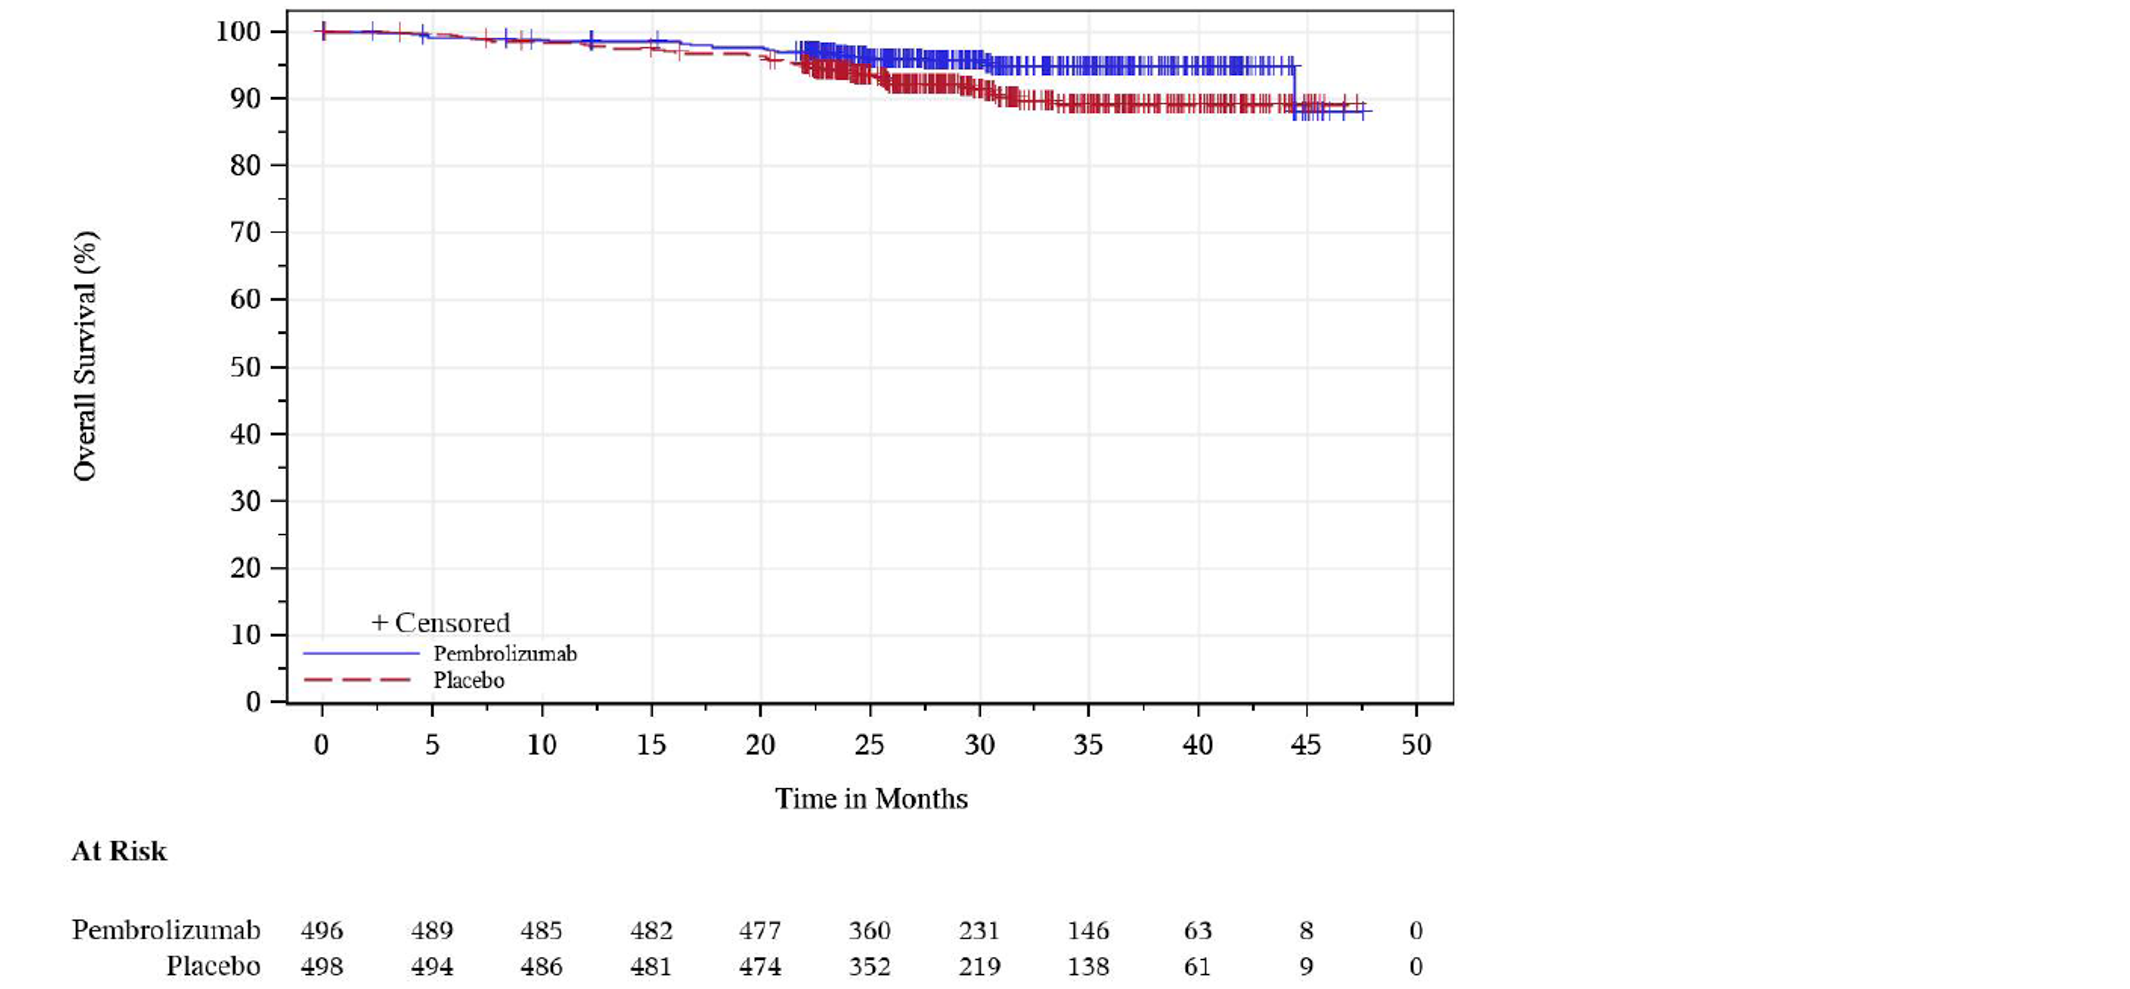 Kaplan-Meier analysis of disease-free survival for patients enrolled in the KEYNOTE-564 trial showing the number of at-risk patients treated receiving pembrolizumab at 0, 5, 10, 15, 20, 25, 30, 35, 40, 45 and 50 months was 496, 489, 485, 482, 477, 360, 231, 146, 63, 8, and 0, respectively. The number of at-risk patients receiving placebo at 0, 5, 10, 15, 20, 25, 30, 35, 40, 45 and 50 months was 498, 494, 486, 481, 474, 352, 219, 138, 61, 9, and 0, respectively.